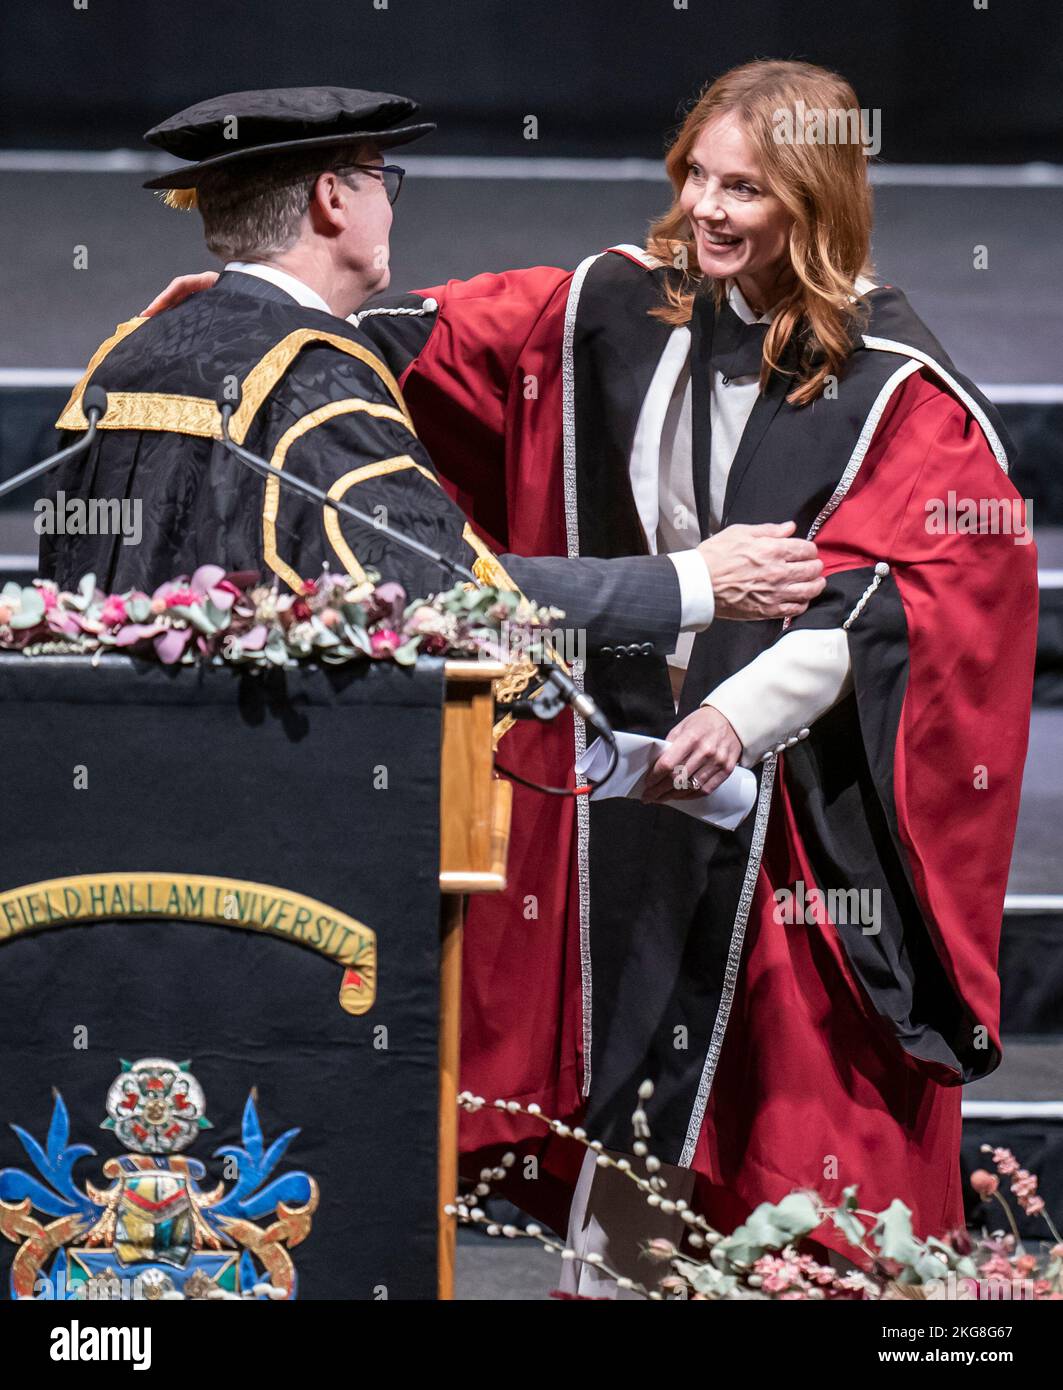 Vice Chancellor of Sheffield Hallam University Chris Husbands (left) congratulates Geri Halliwell-Horner (right) after she received an honorary doctorate from Sheffield Hallam University at Ponds Forge International Sports Centre in Sheffield. Picture date: Tuesday November 22, 2022. Stock Photo